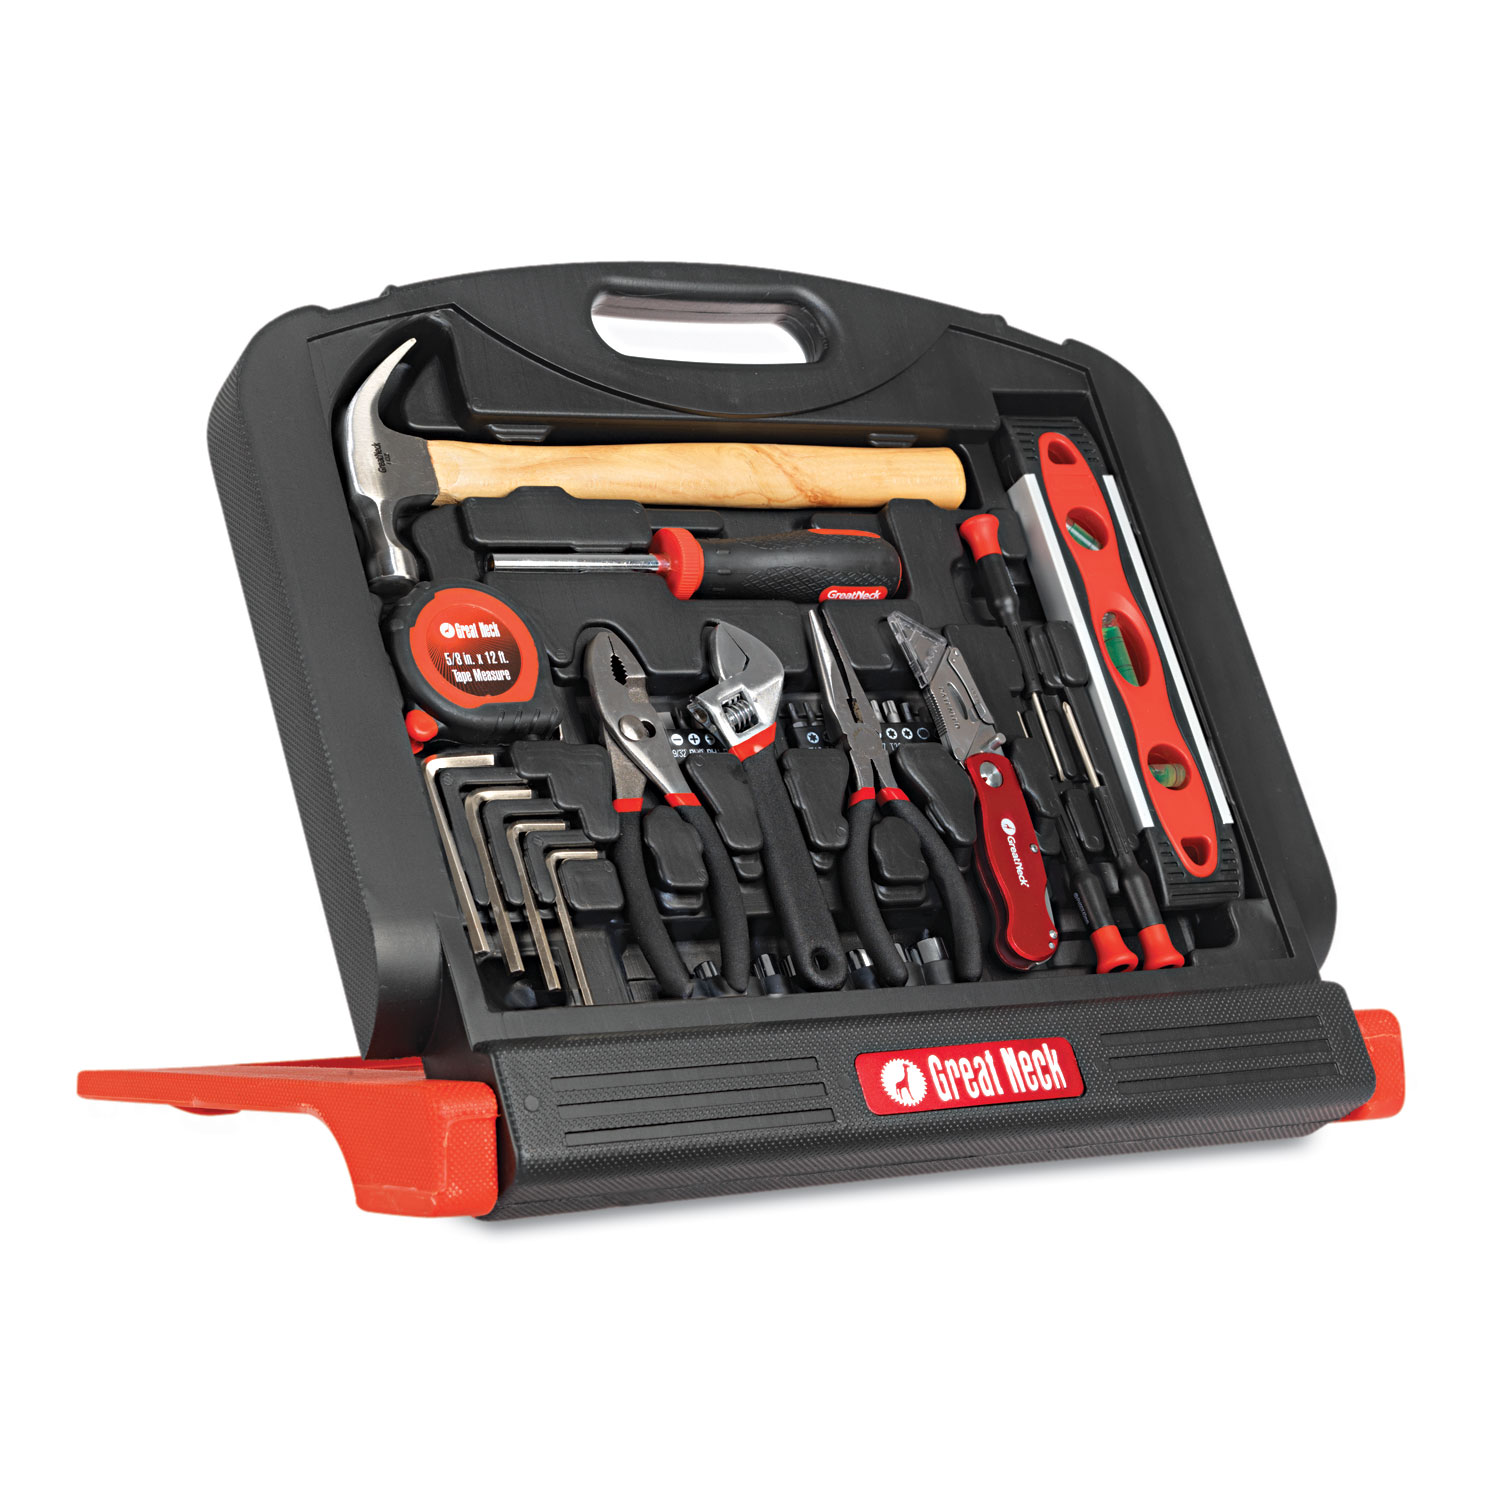  Great Neck GN48 48-Tool Set in Blow-Molded Case, Black (GNSGN48) 